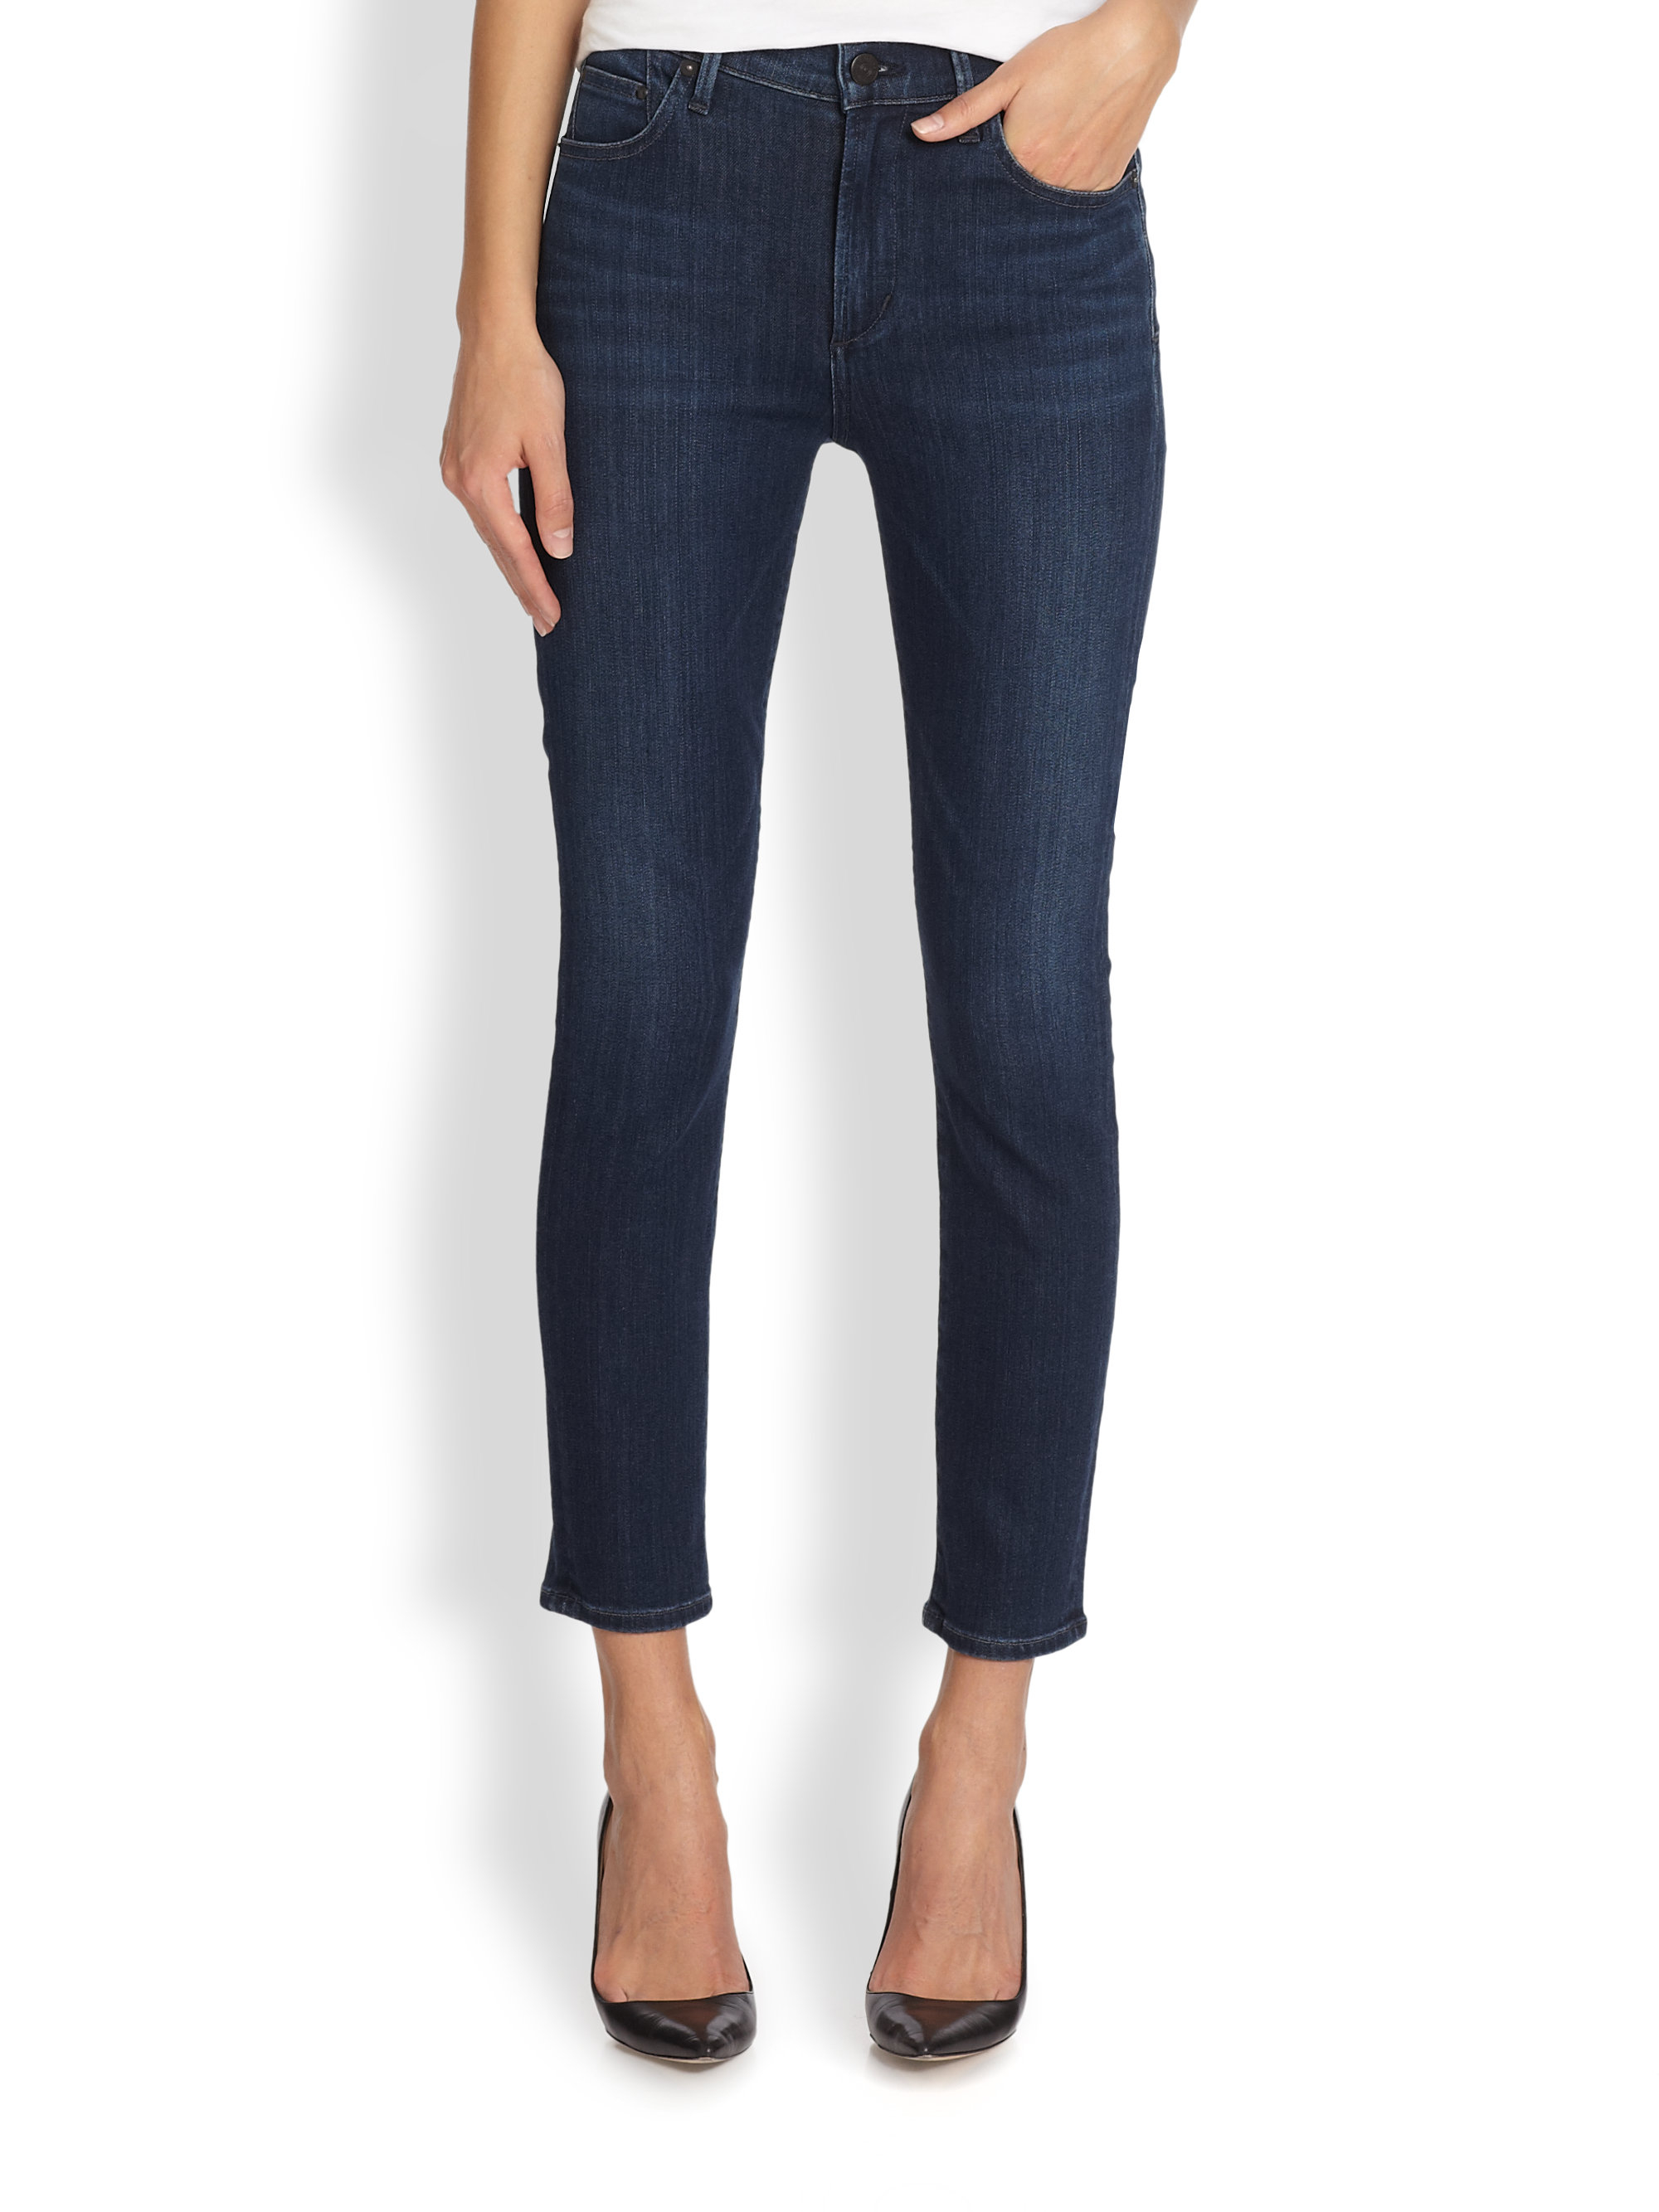 Citizens of humanity Rocket Cropped Skinny Jeans in Blue | Lyst